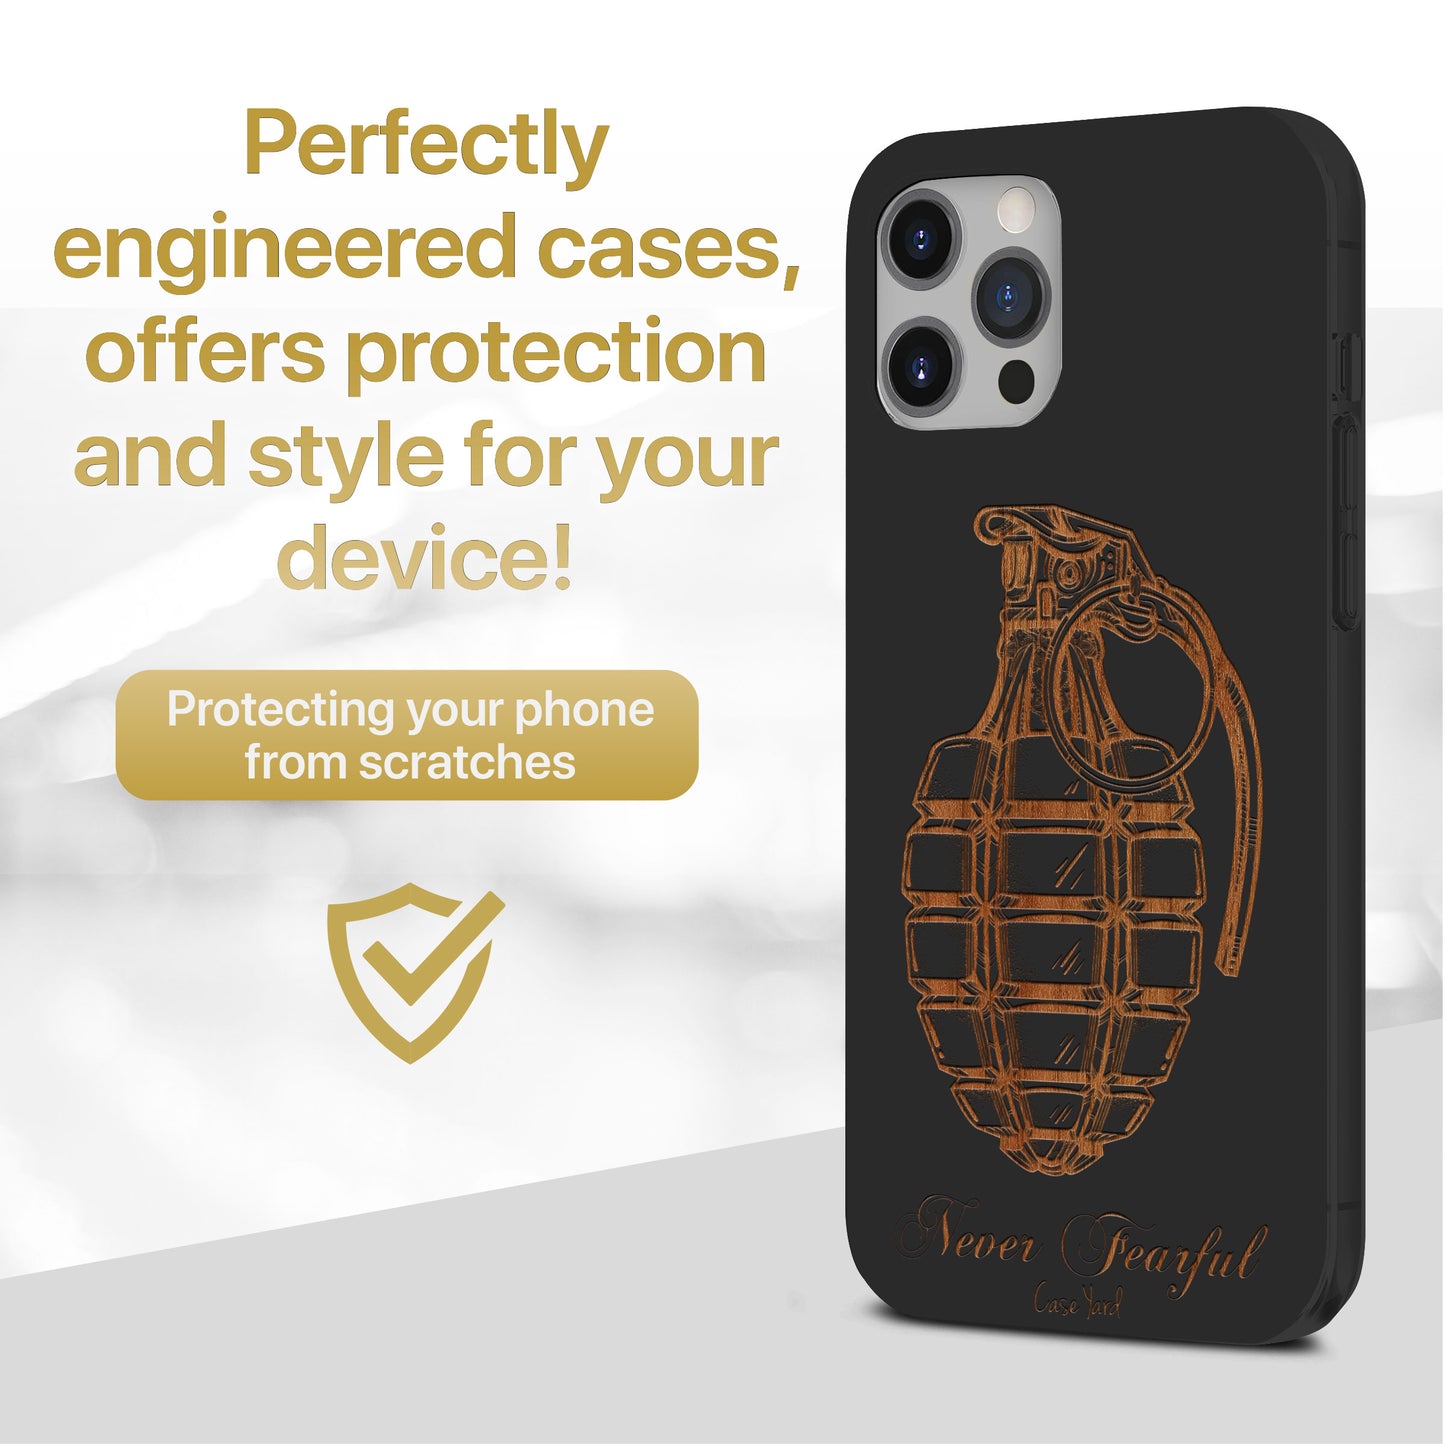 Wooden Cell Phone Case Cover, Laser Engraved case for iPhone & Samsung phone Never Fearful Design